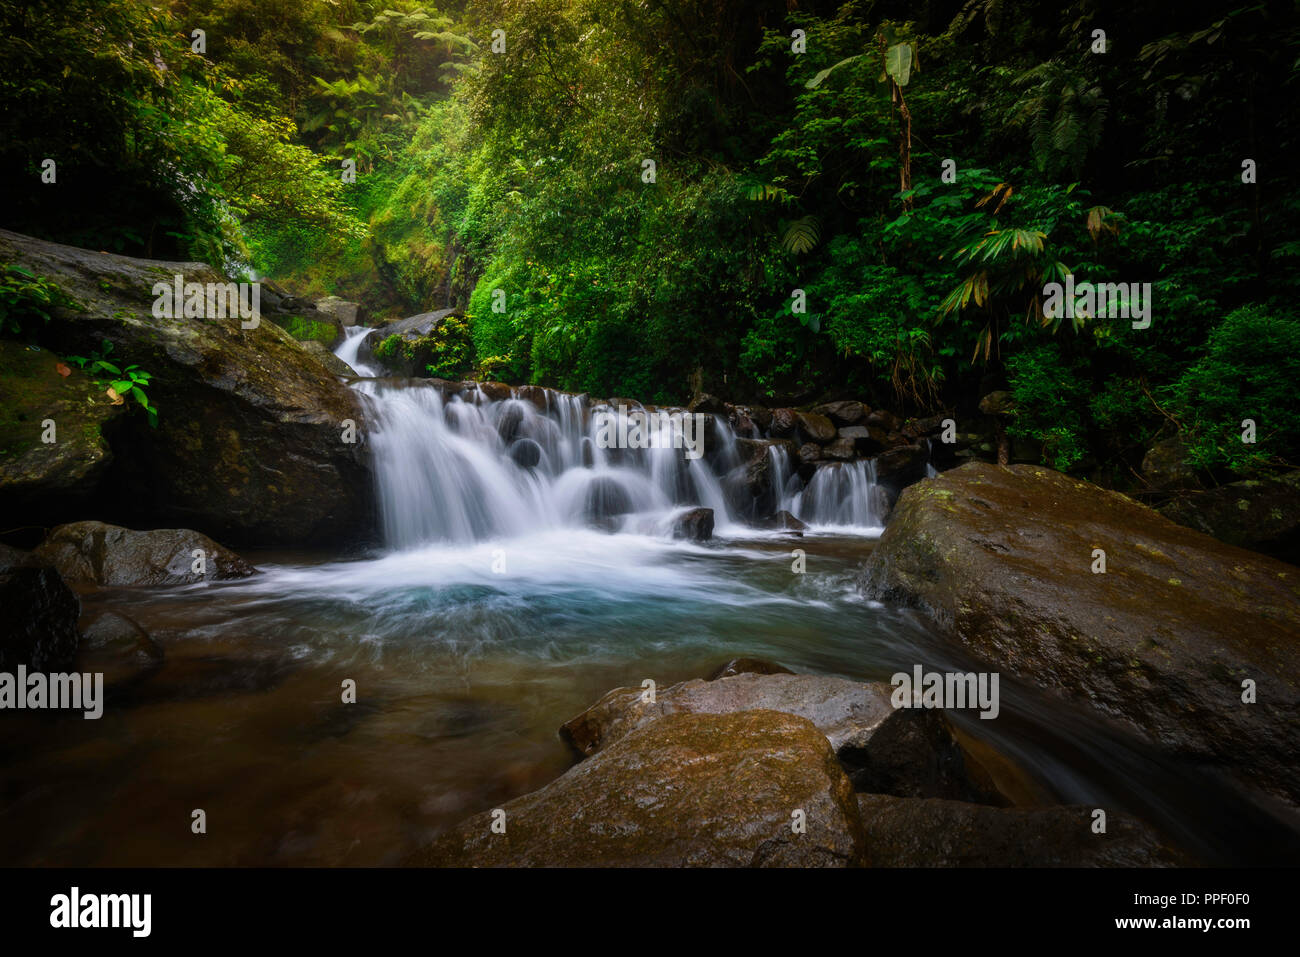 Small unknown waterfall in Bogor, West Java Indonesia Stock Photo